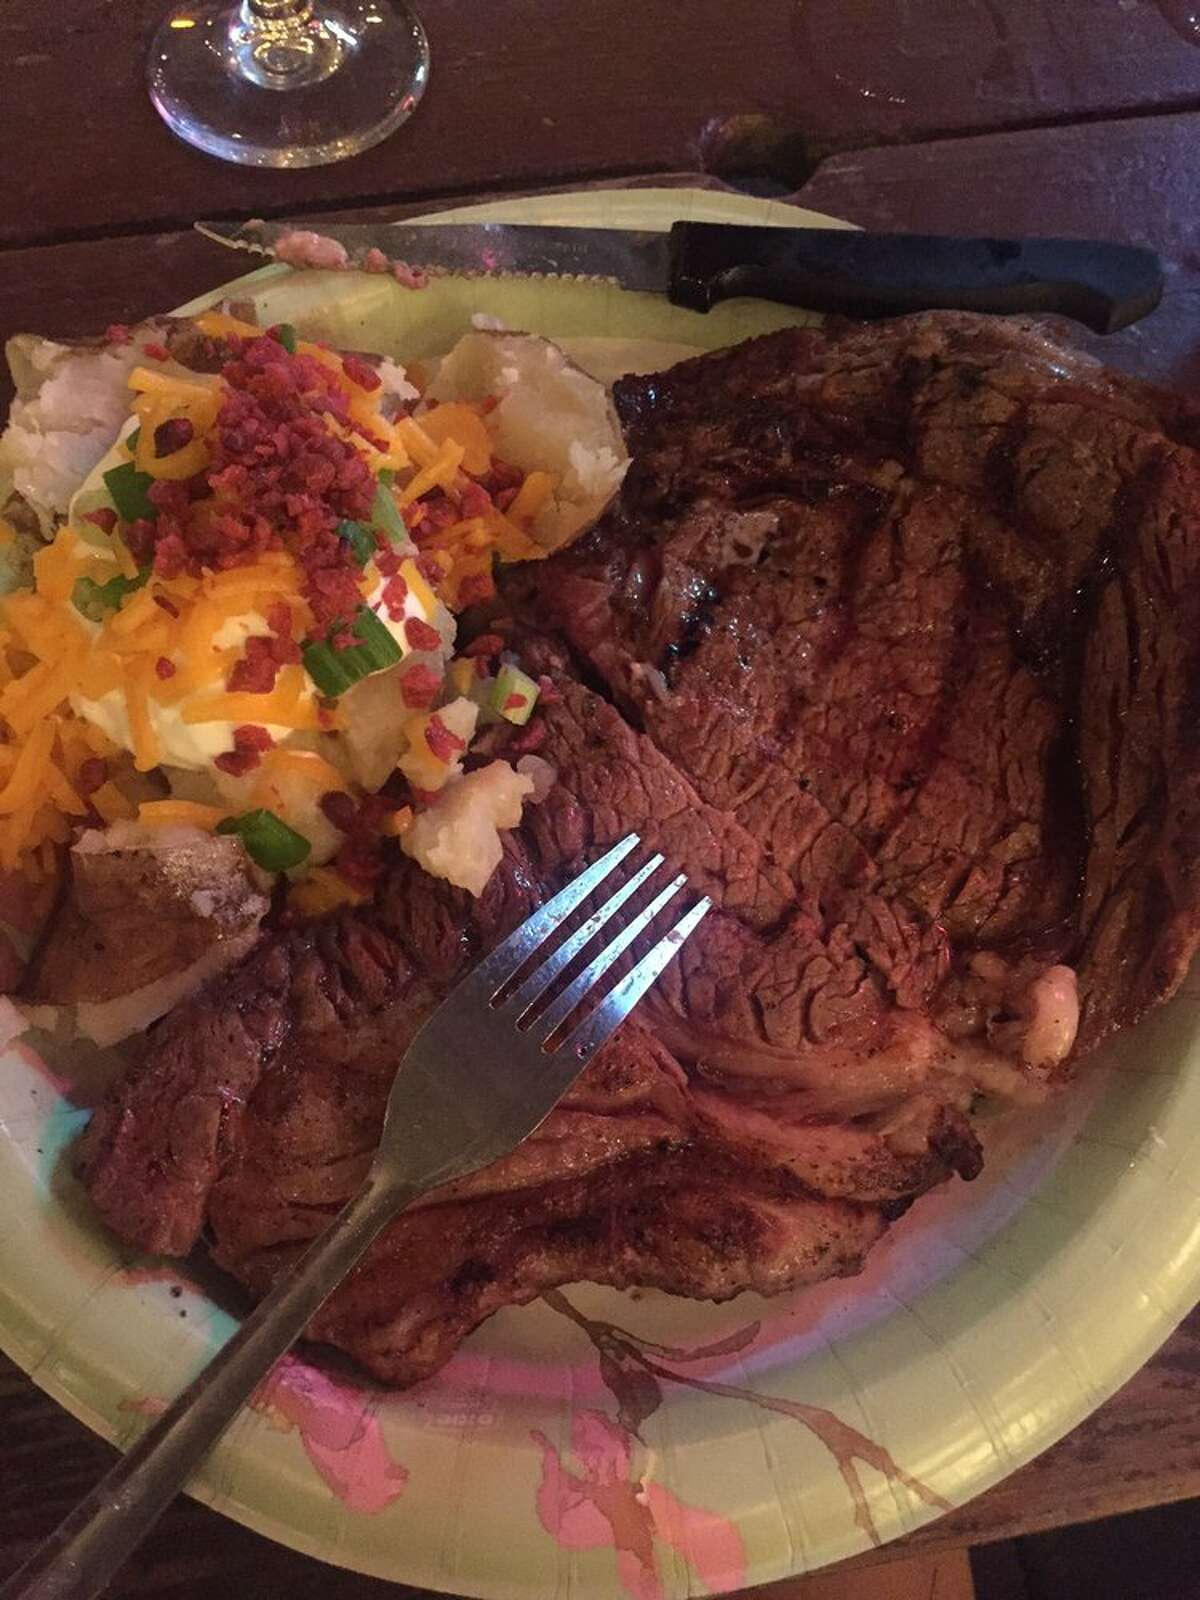 Onion Creek 3106 White Oak Dr., (713) 880-0706Steak night: Monday and Wednesday eveningsDeal: $17 hand-cut ribeye and two sidesPhoto by: Yelp/Andrea P.